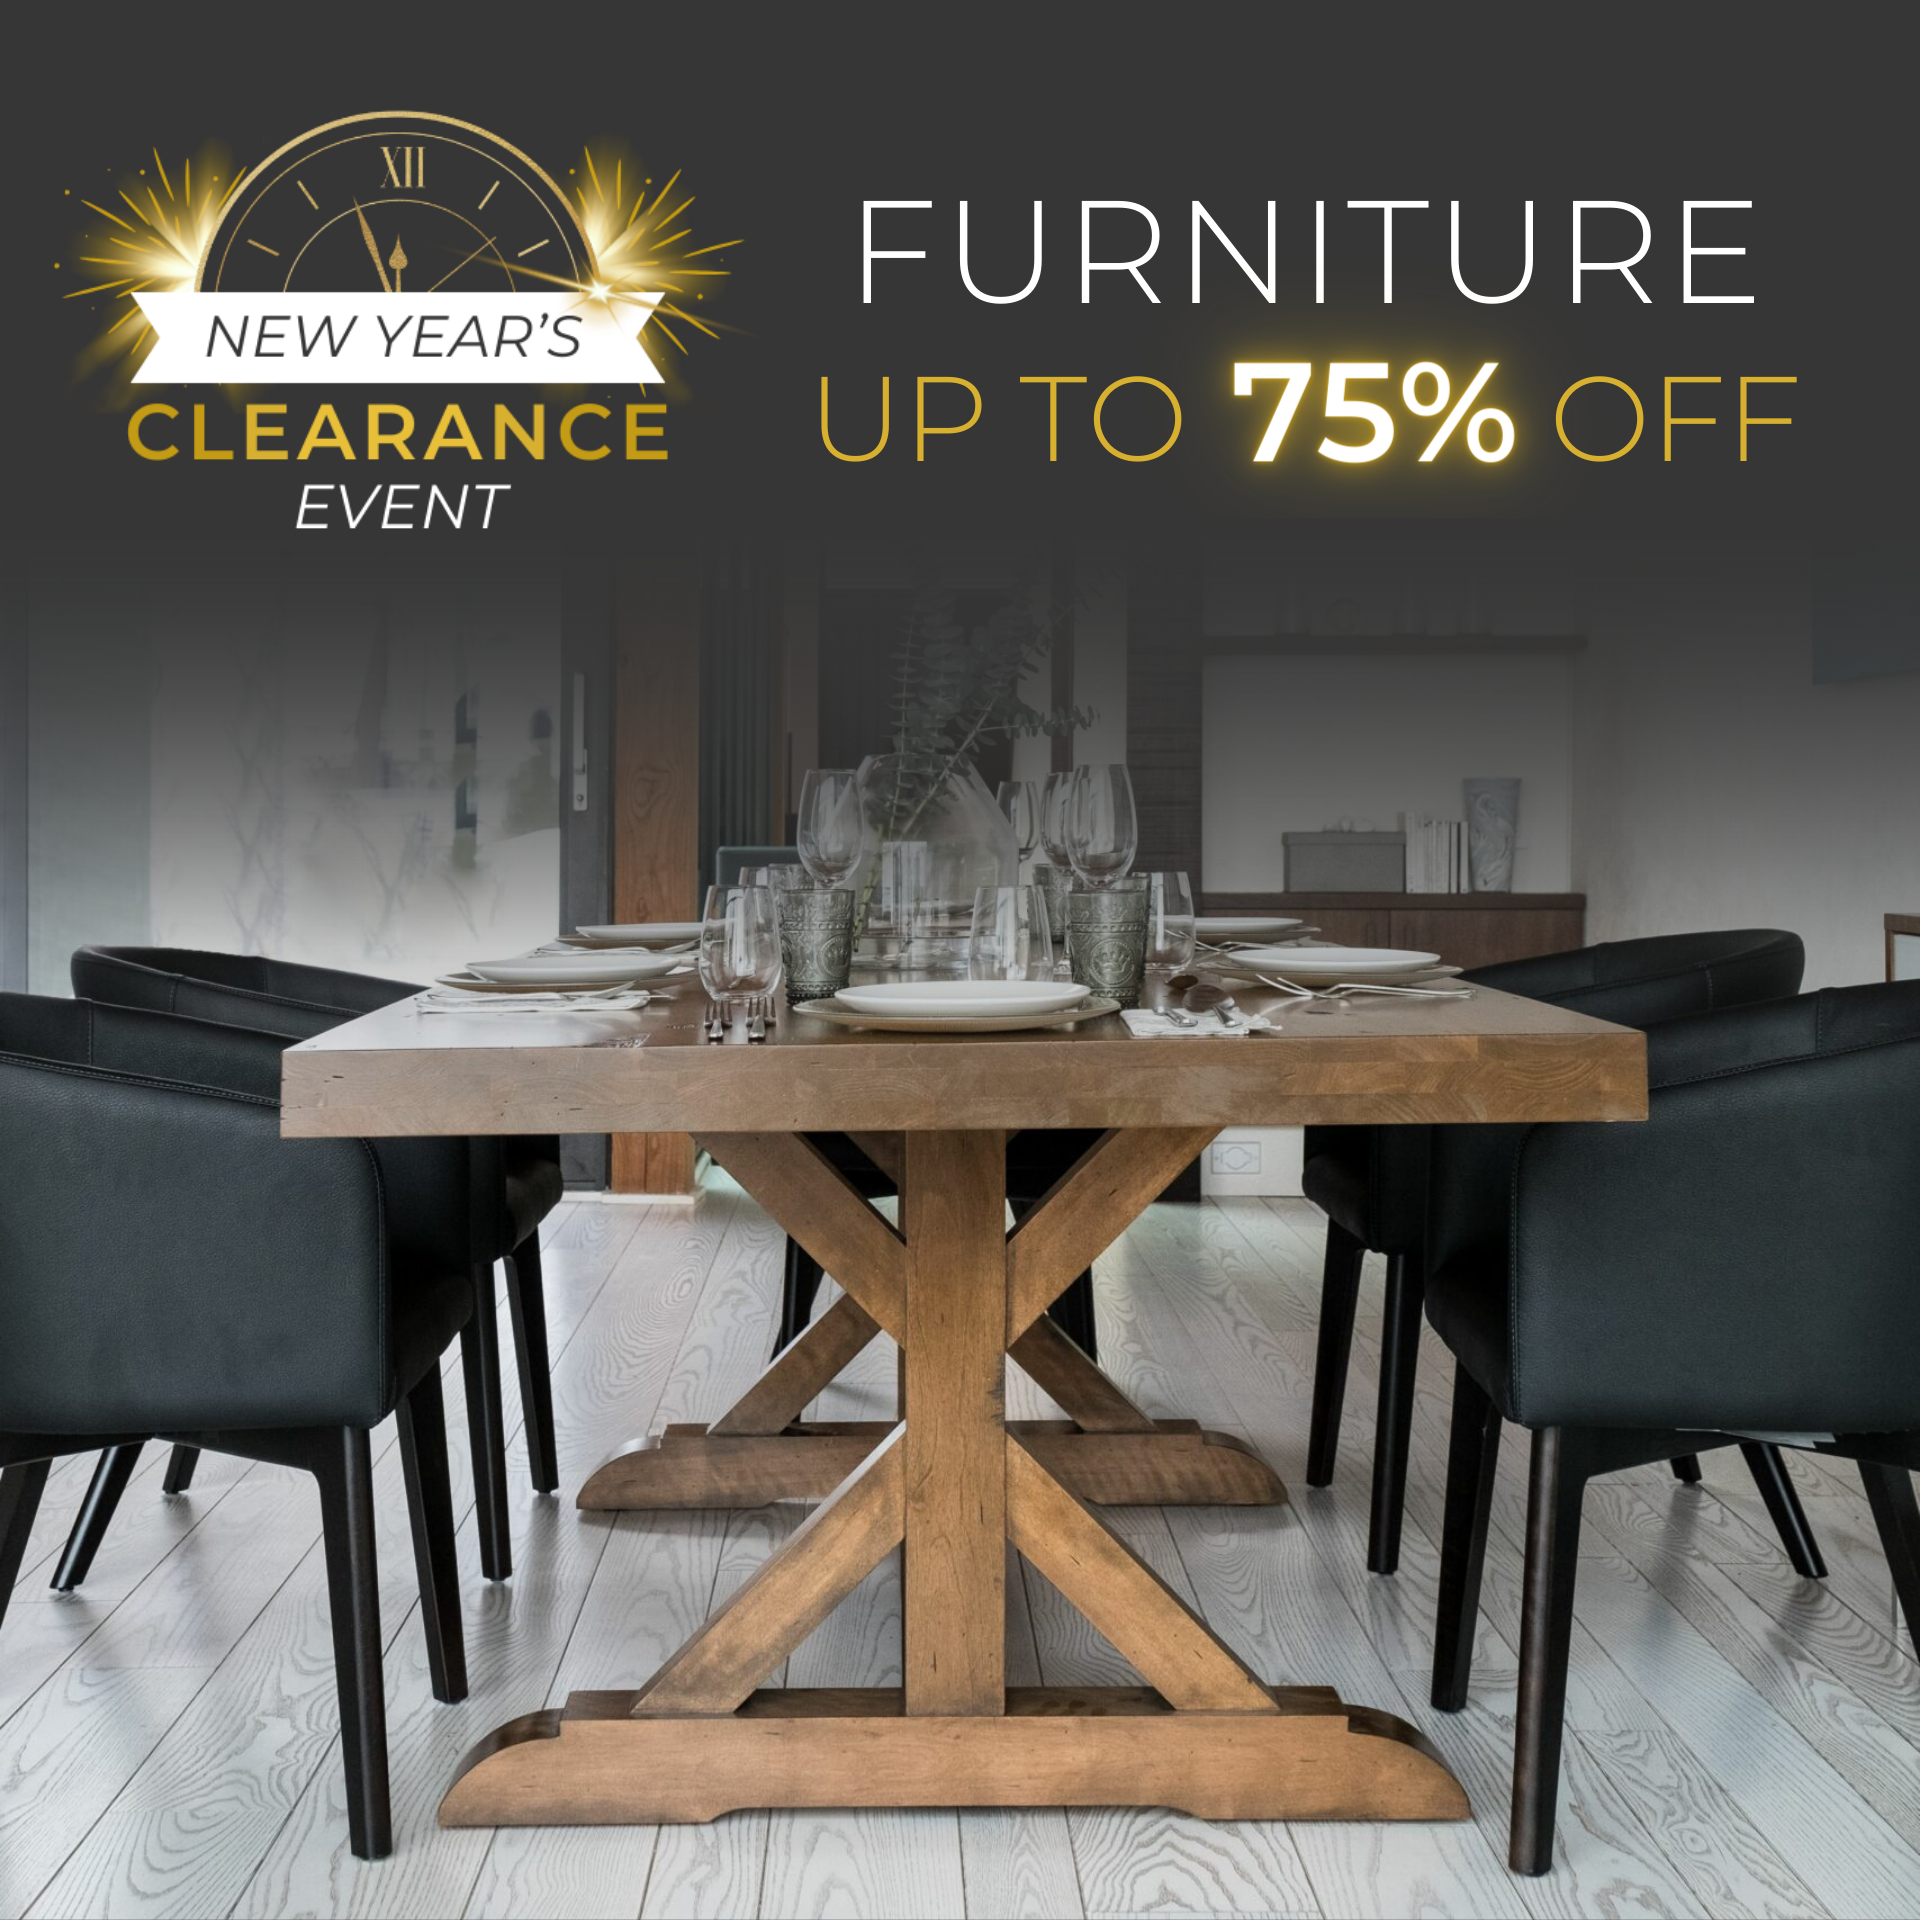 Clearance Outlet Offers Cabinets at 70% Off!